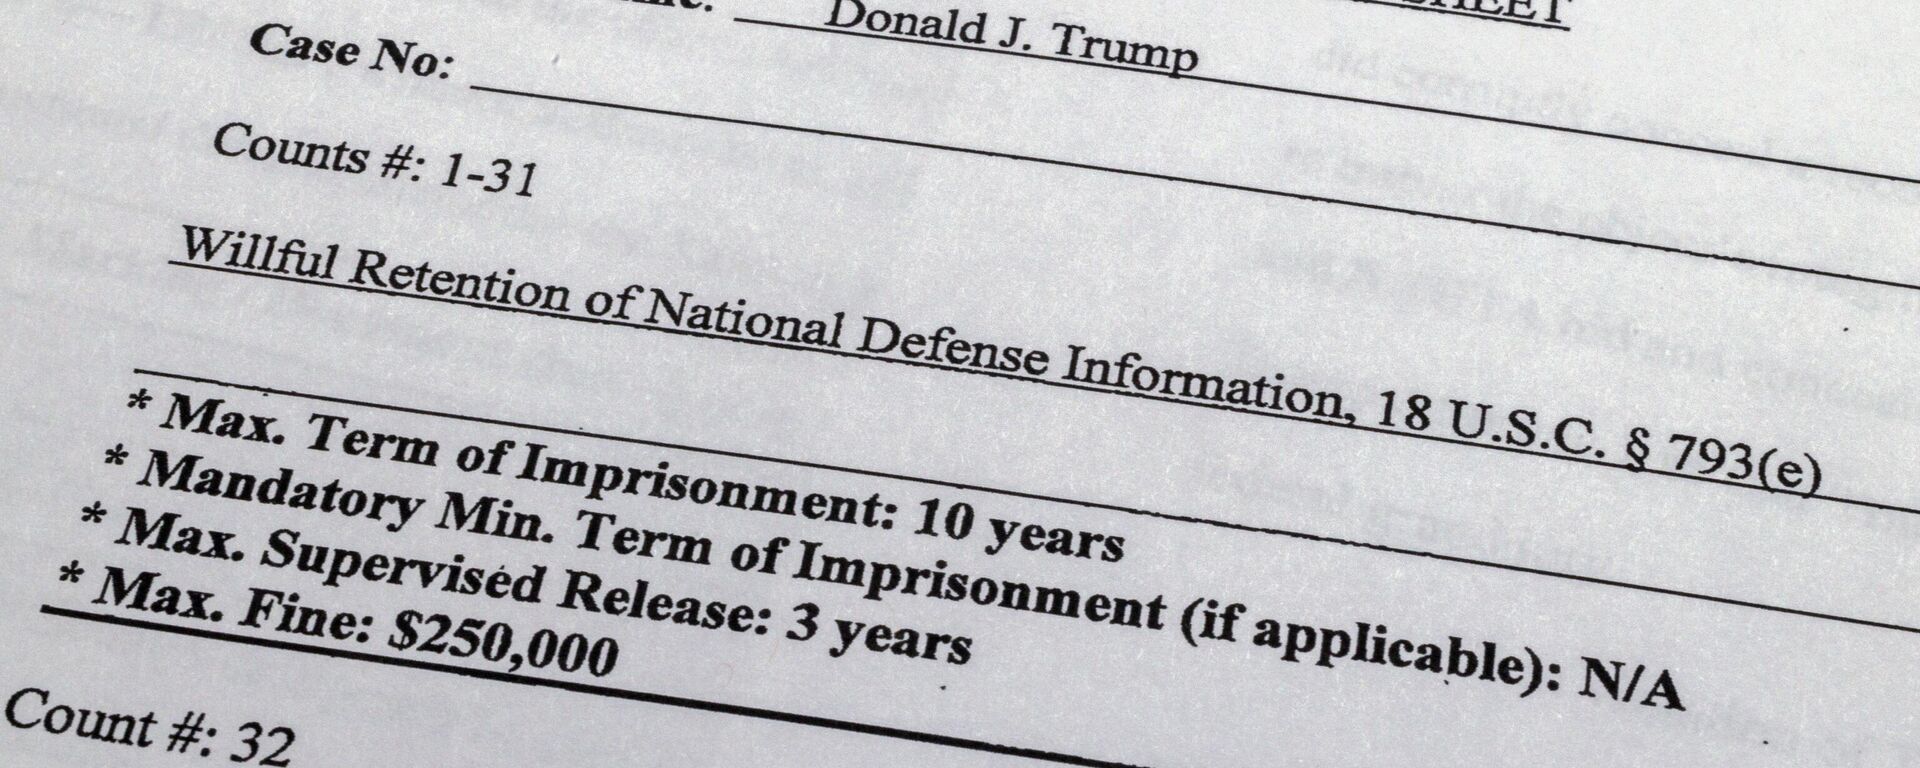 The indictment against former President Donald Trump is photographed on Friday, June 9, 2023. Trump is facing 37 felony charges related to the mishandling of classified documents according to the unsealed indictment that also alleges that he improperly shared a Pentagon plan of attack and a classified map related to a military operation. - Sputnik International, 1920, 10.06.2023